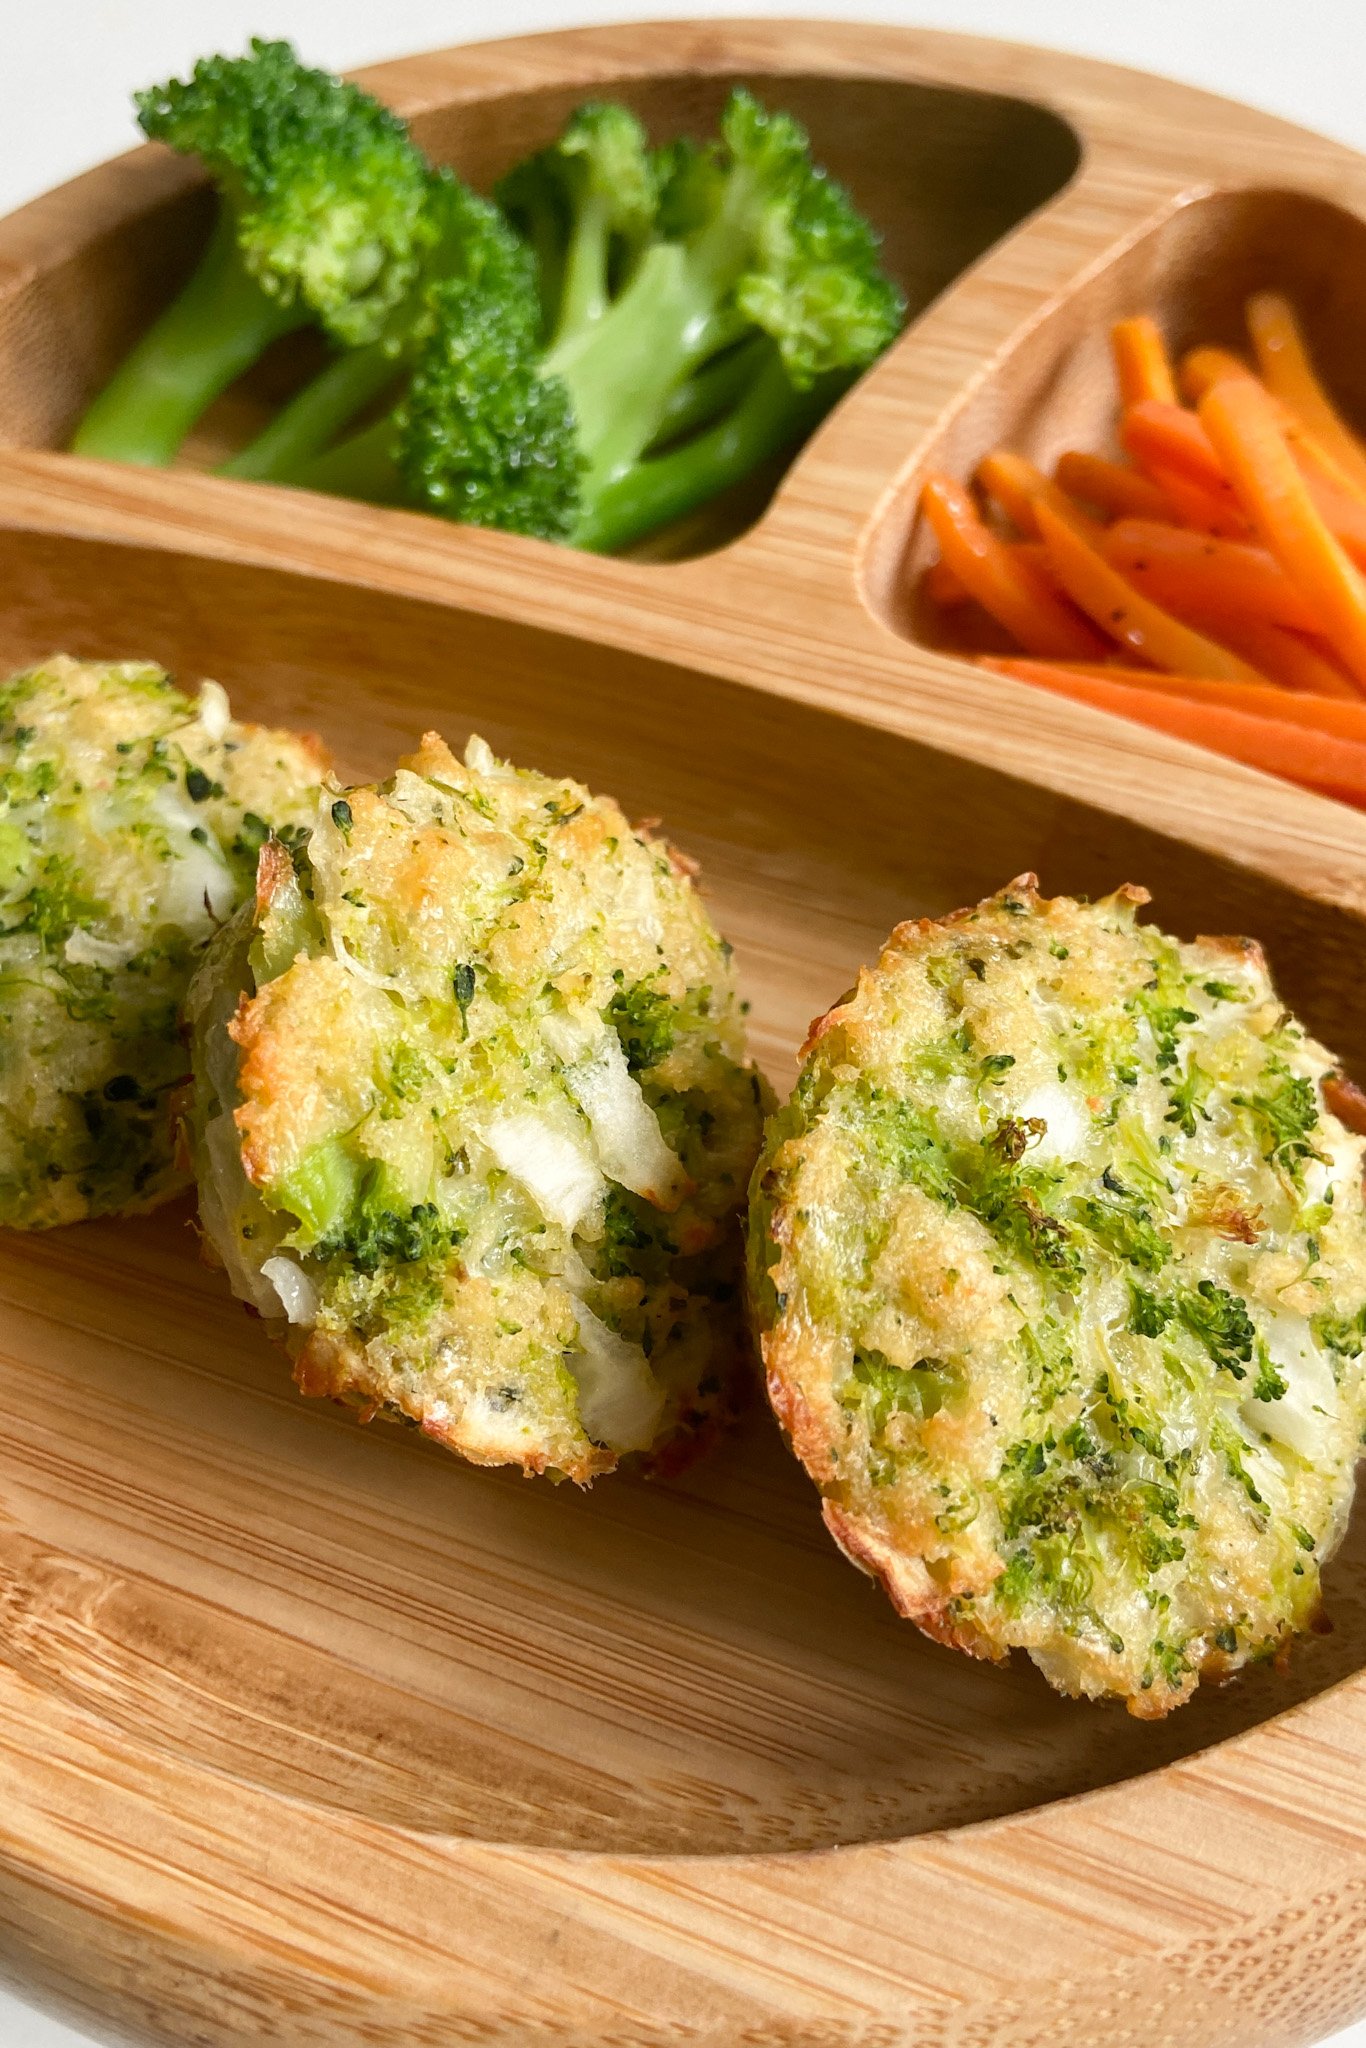 Broccoli and cheese bites served with broccoli and sliced carrots